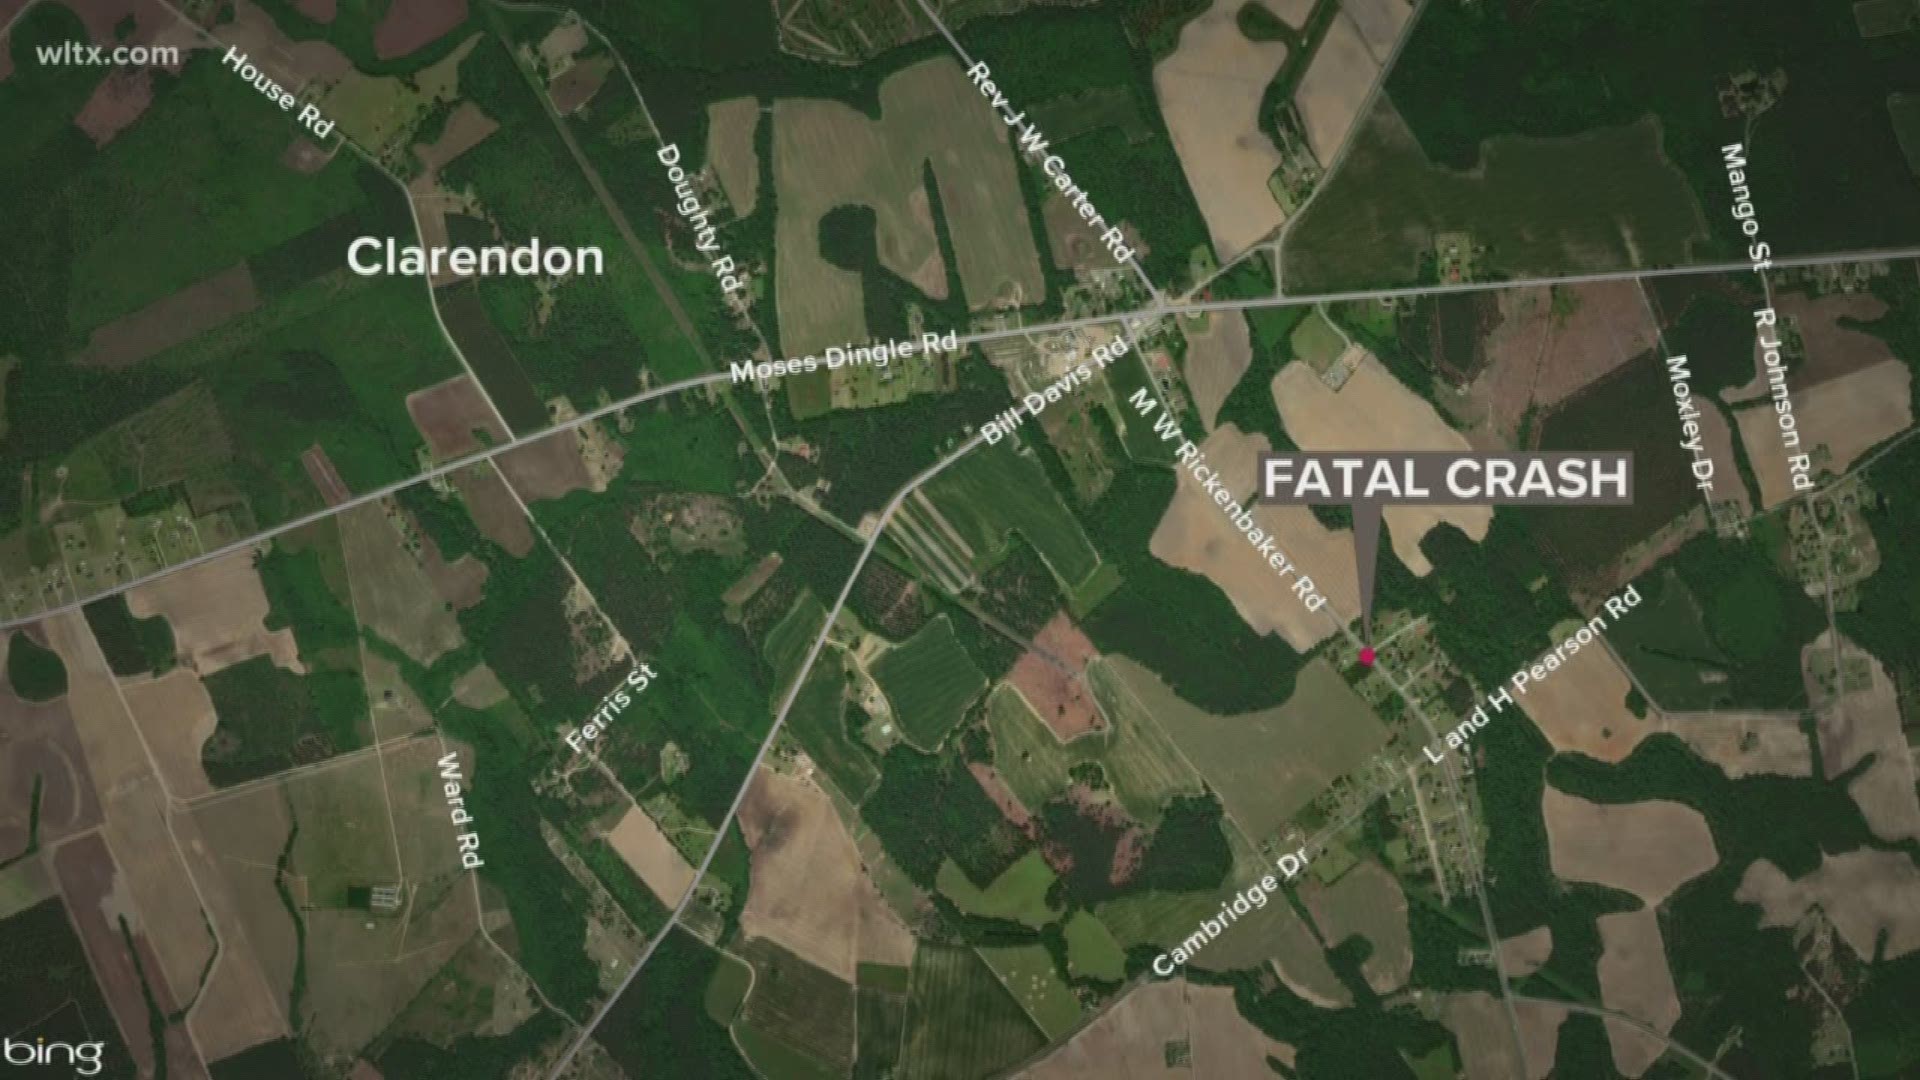 A pedestrian was killed after a vehicle hit them in Clarendon County.